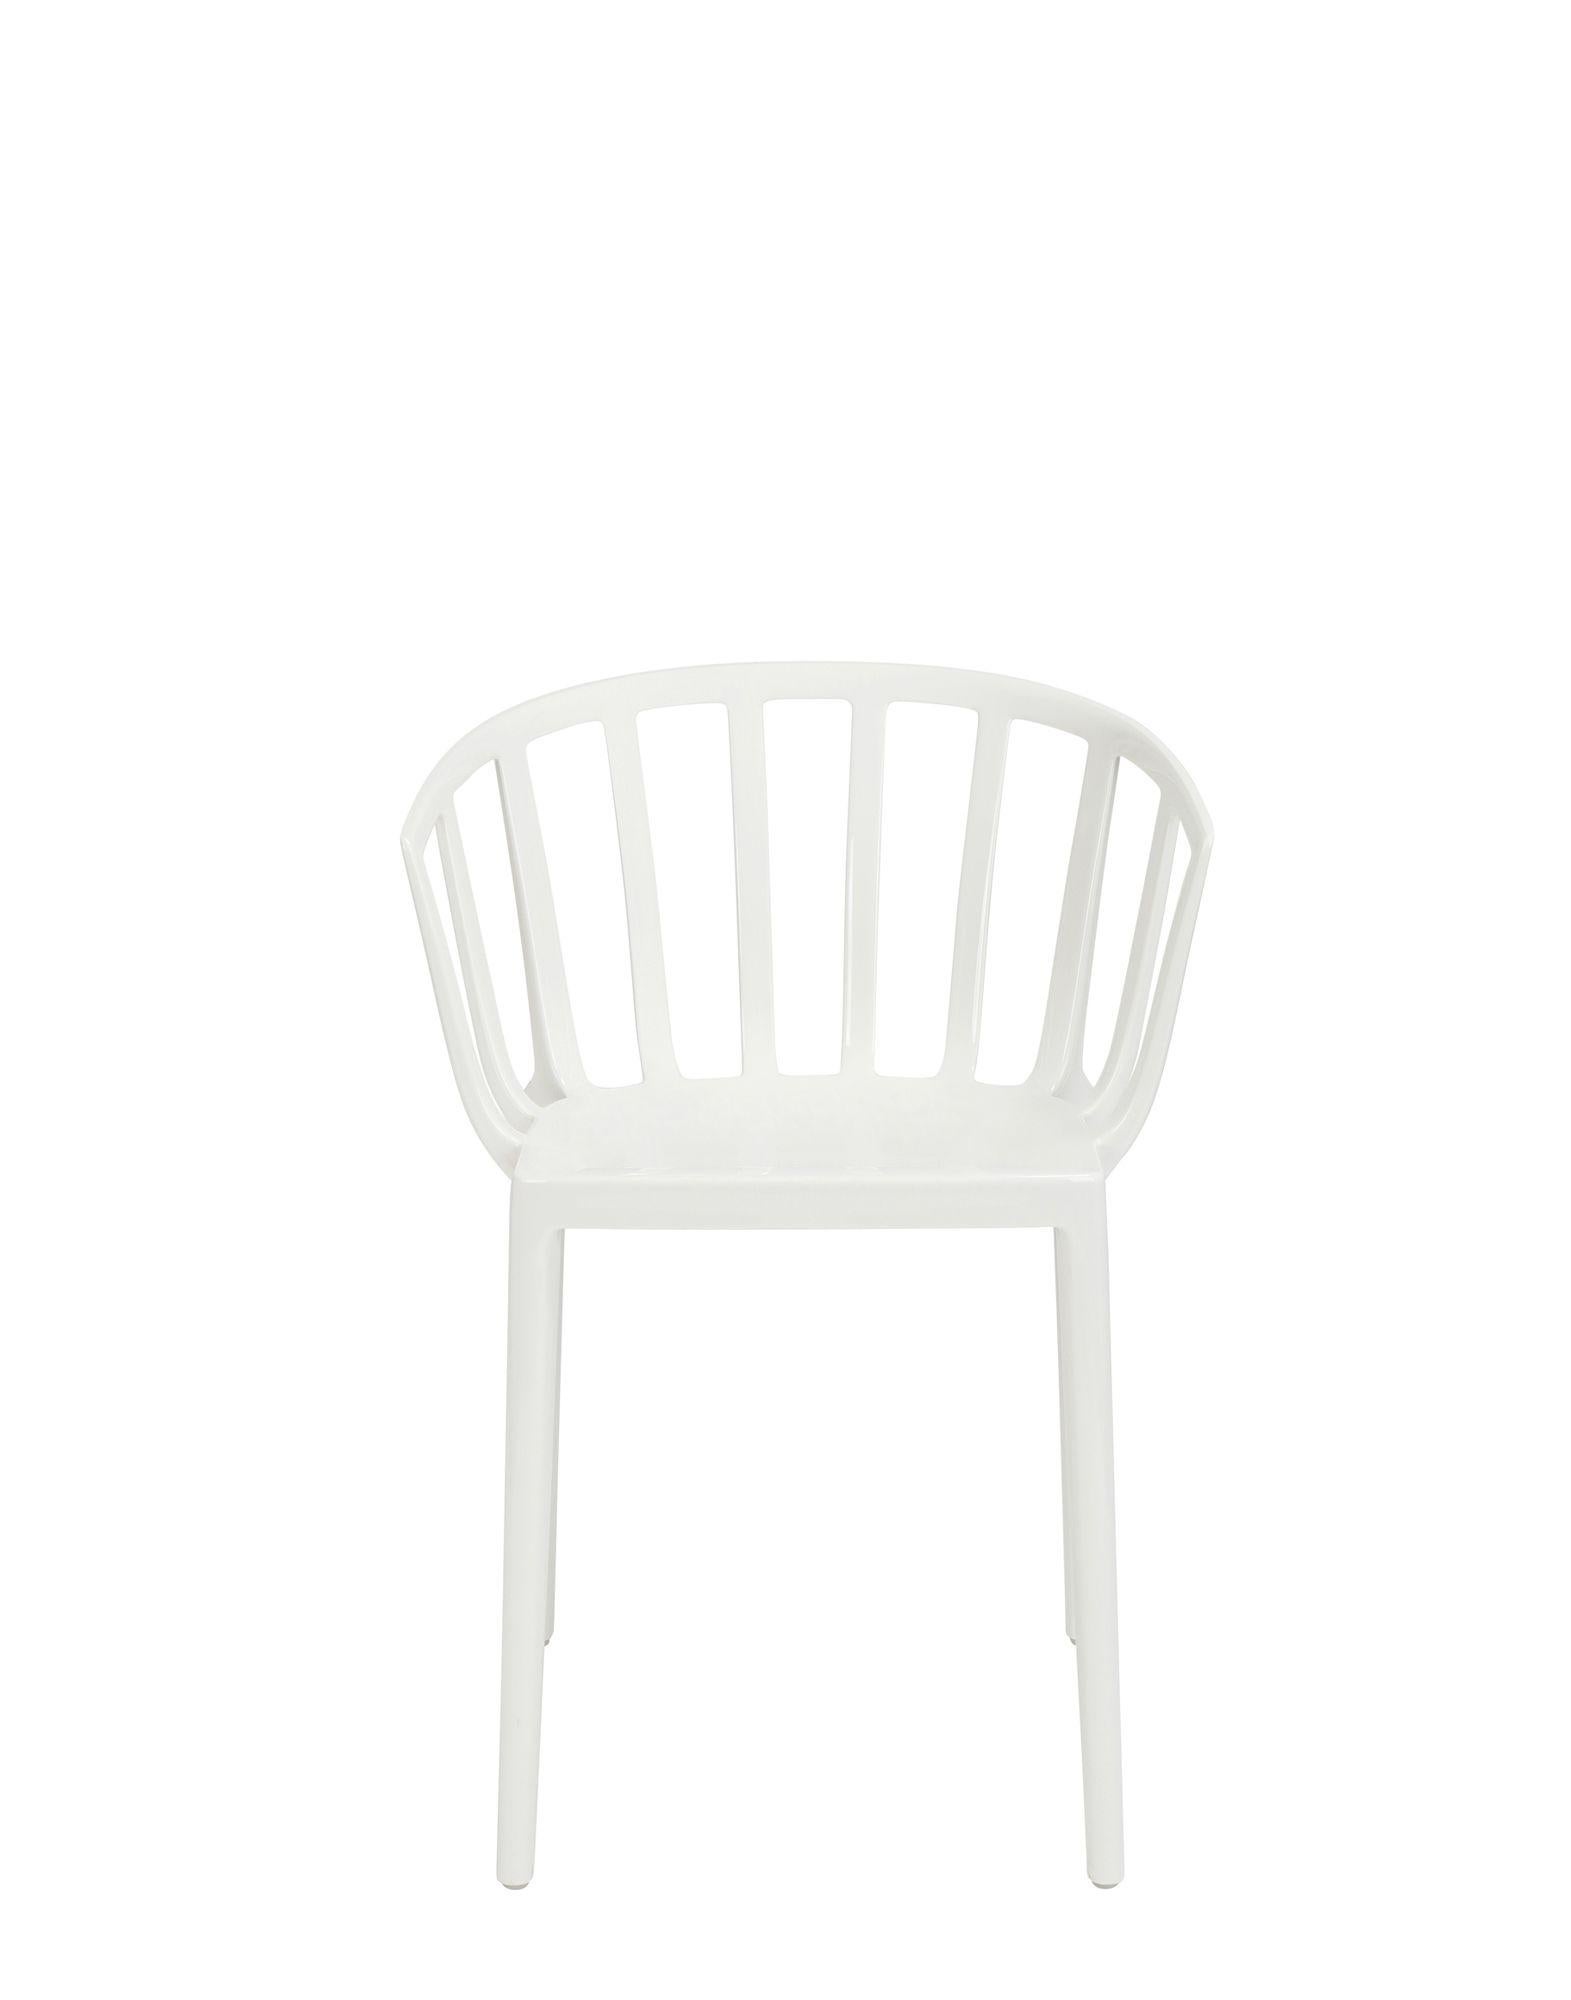 Italian Set of 2 Kartell Venice Chairs in Glossy White by Philippe Starck For Sale